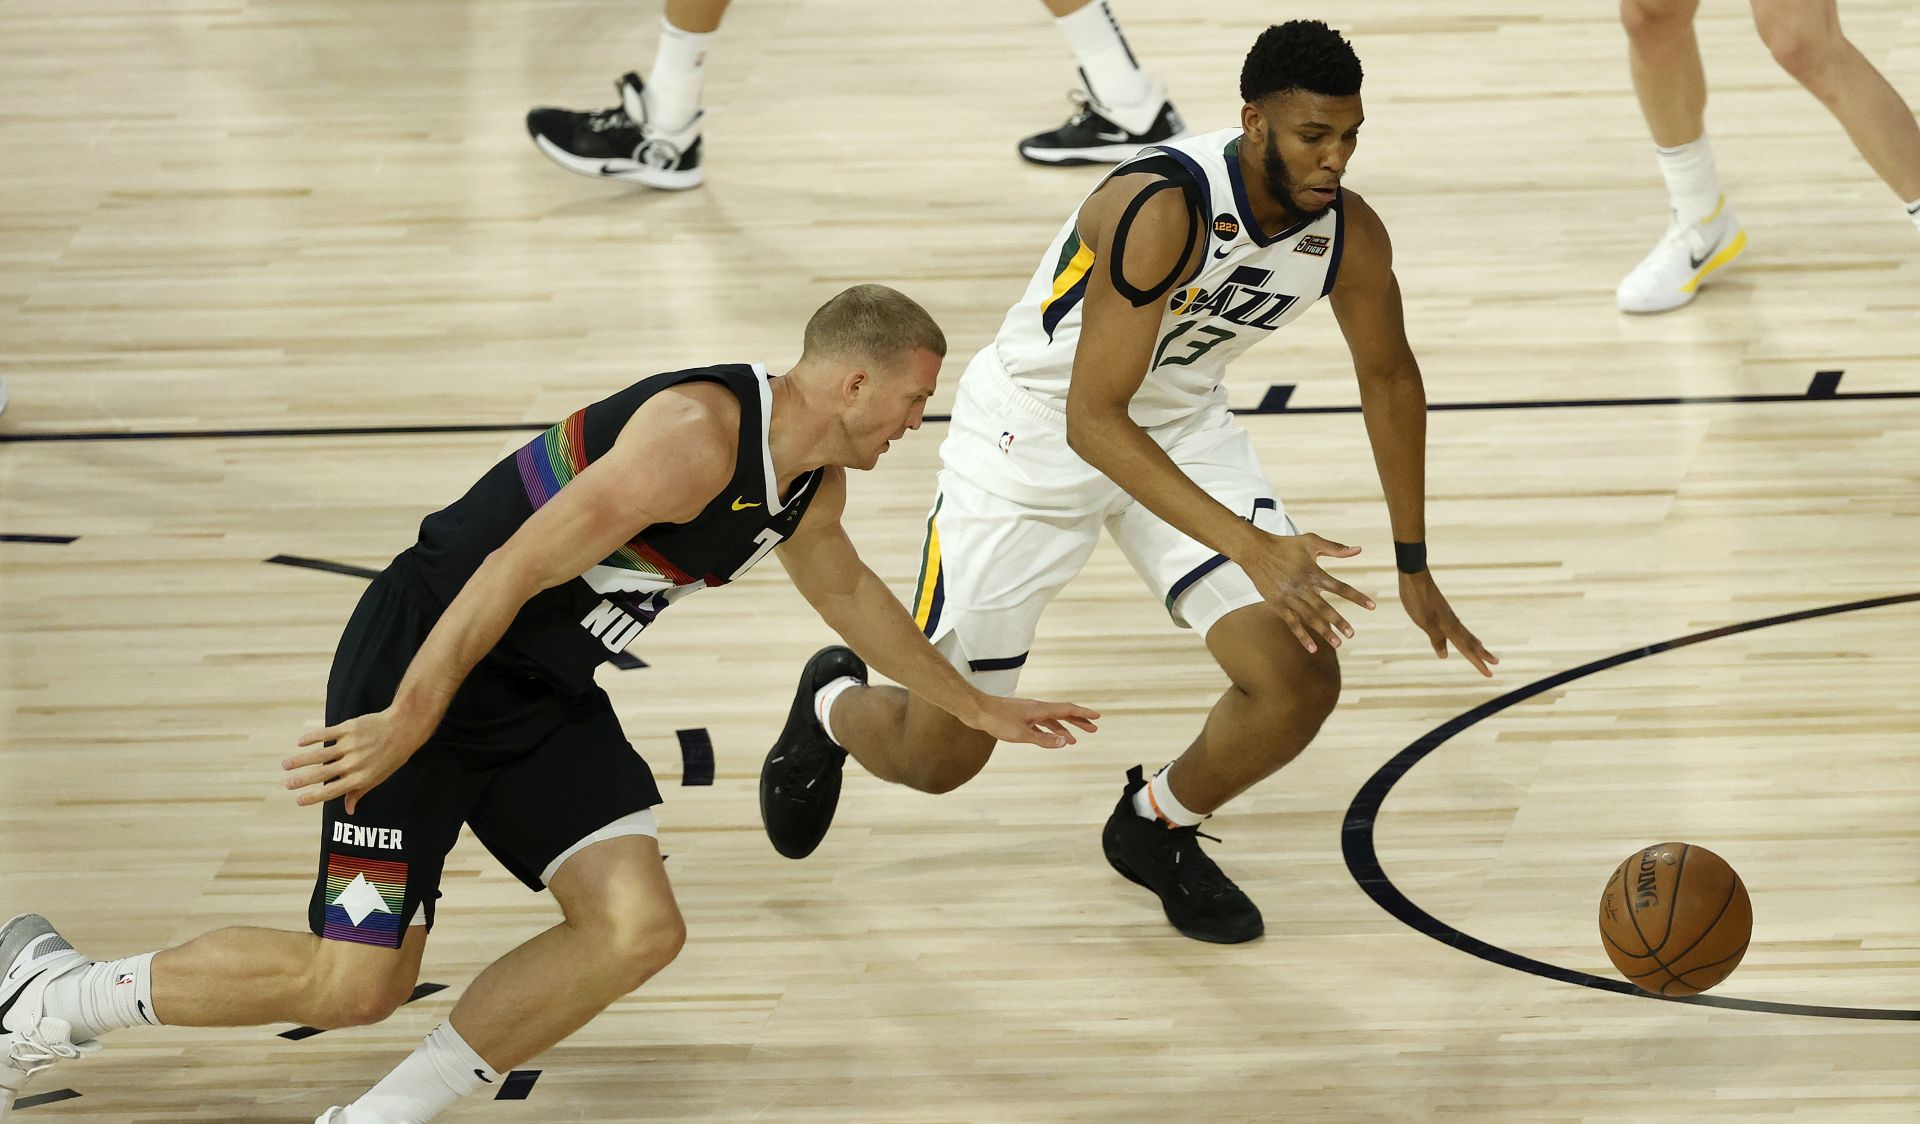 epa08625760 Utah Jazz center Tony Bradley (R) and Denver Nuggets forward Mason Plumlee (L) reach out for a loose ball during the first half of the NBA basketball first-round playoff game five at the ESPN Wide World of Sports Complex in Kissimmee, Florida, USA, 25 August 2020.  EPA/JOHN G. MABANGLO  SHUTTERSTOCK OUT